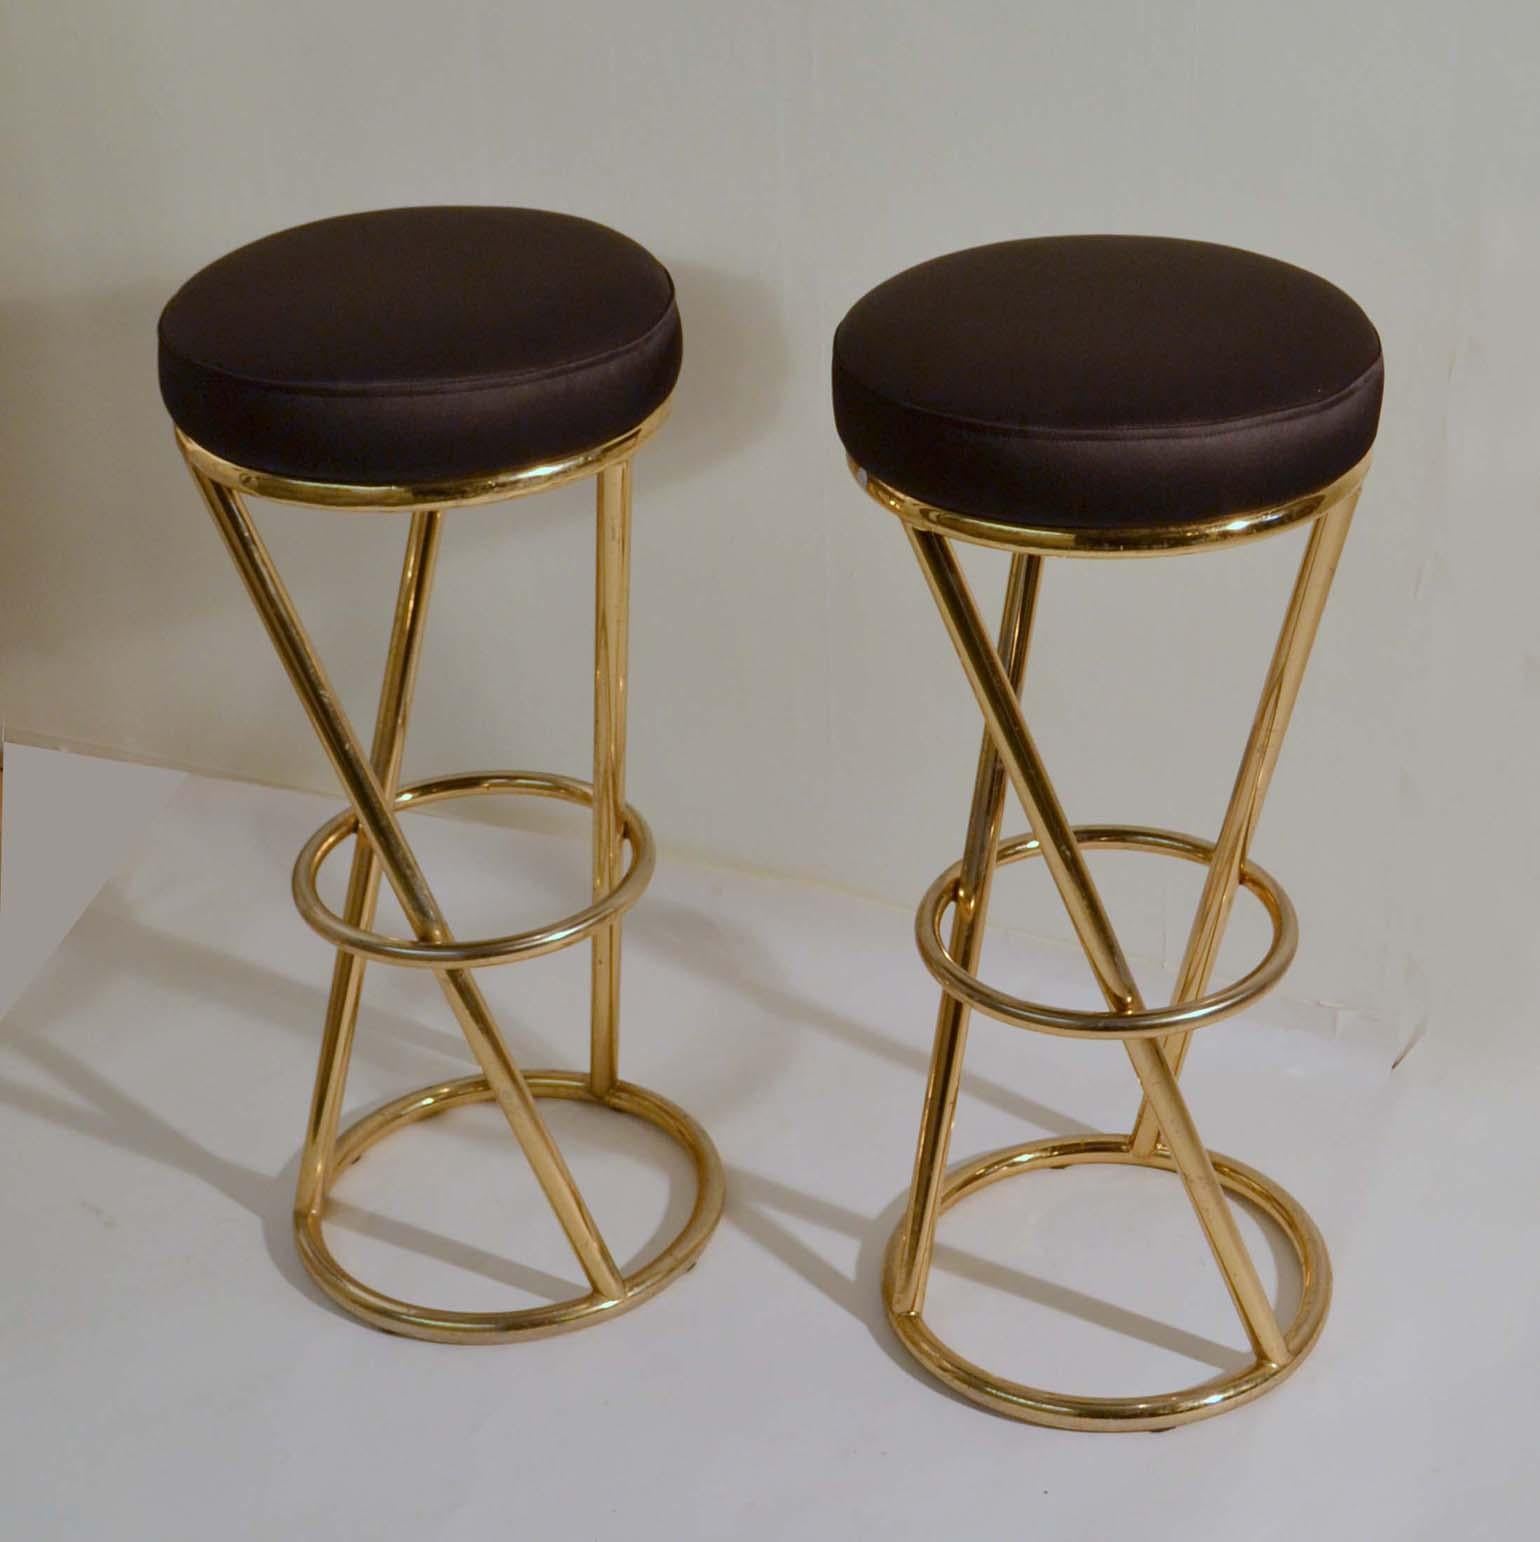 Circular bar stools have tubular brass plated metal frames. Designed by Pierre Chareau in the 1930s (Art Deco). This is a 1980s re-edition.
The seats are re-upholstered in black satin. They are very comfortable and sturdy.